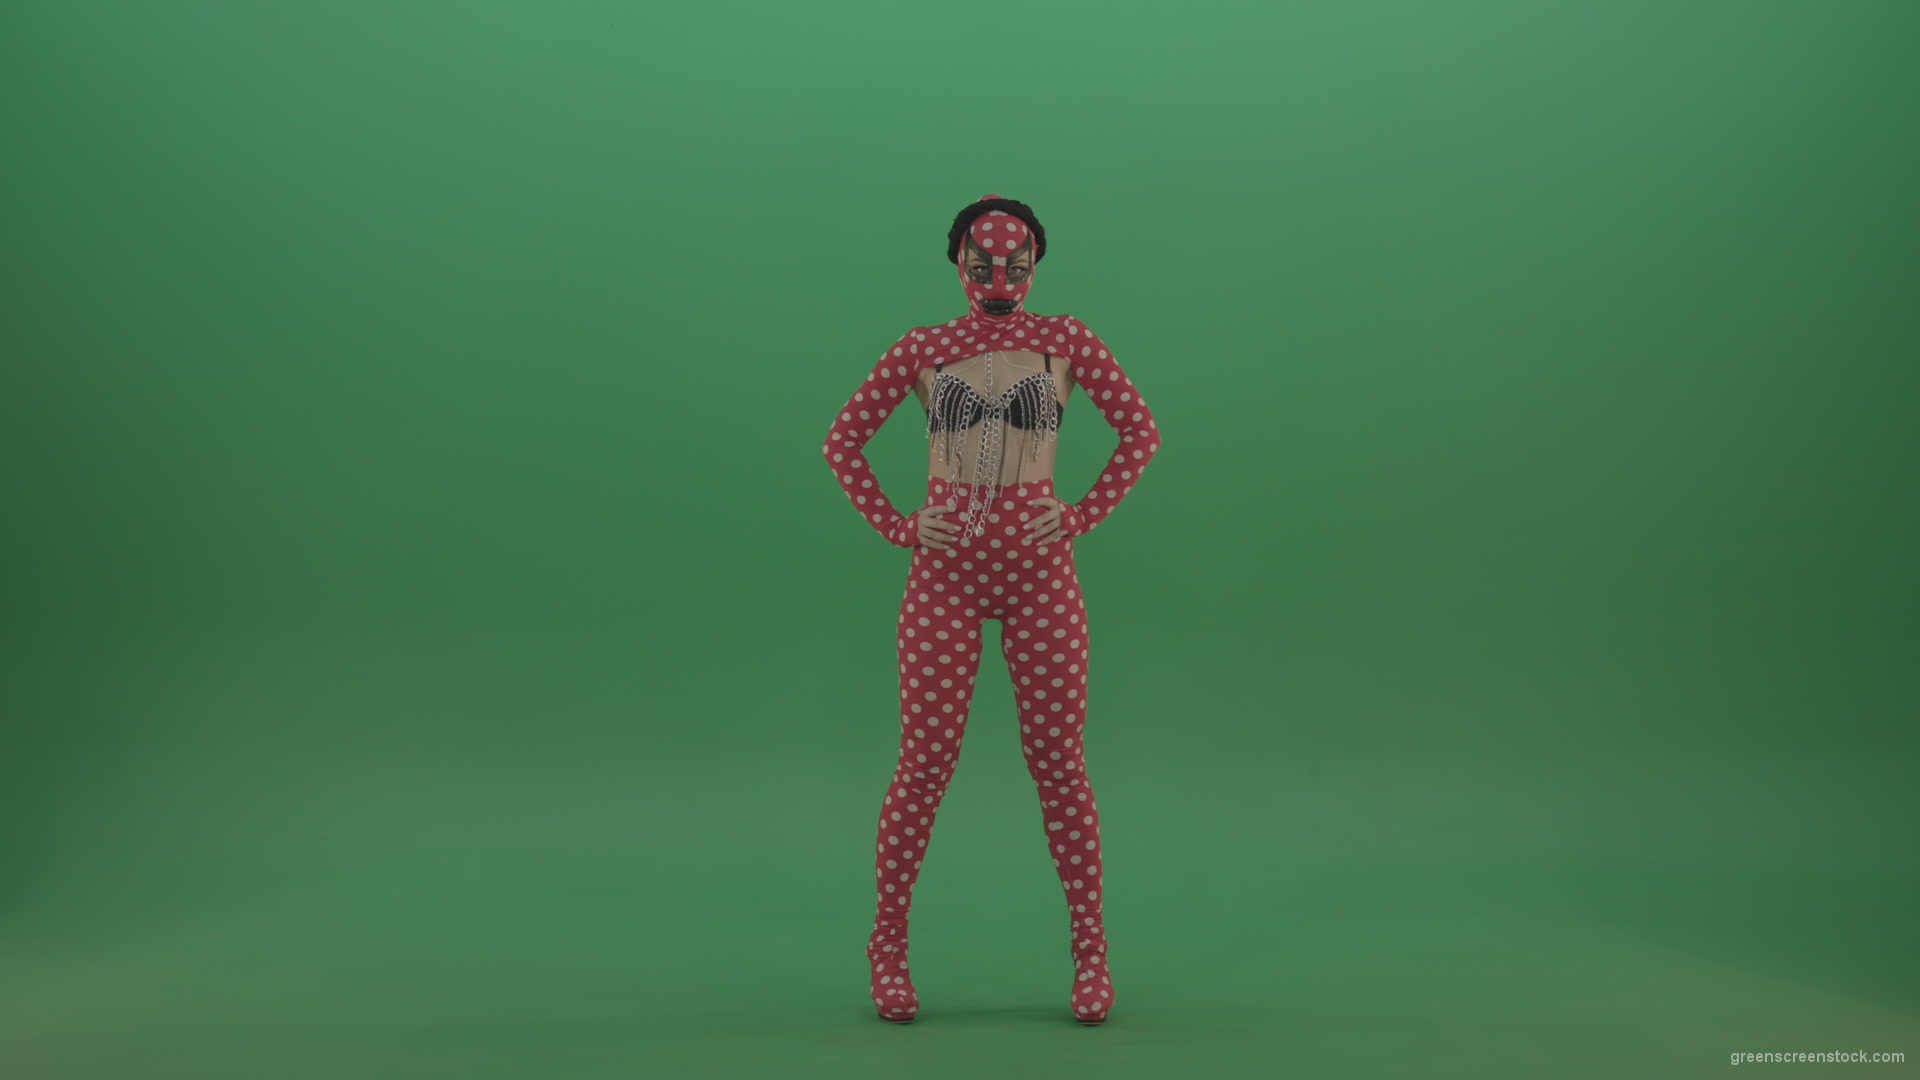 Girl-in-red-strip-dance-costume-in-front-view-posing-isolated-on-green-screen_002 Green Screen Stock